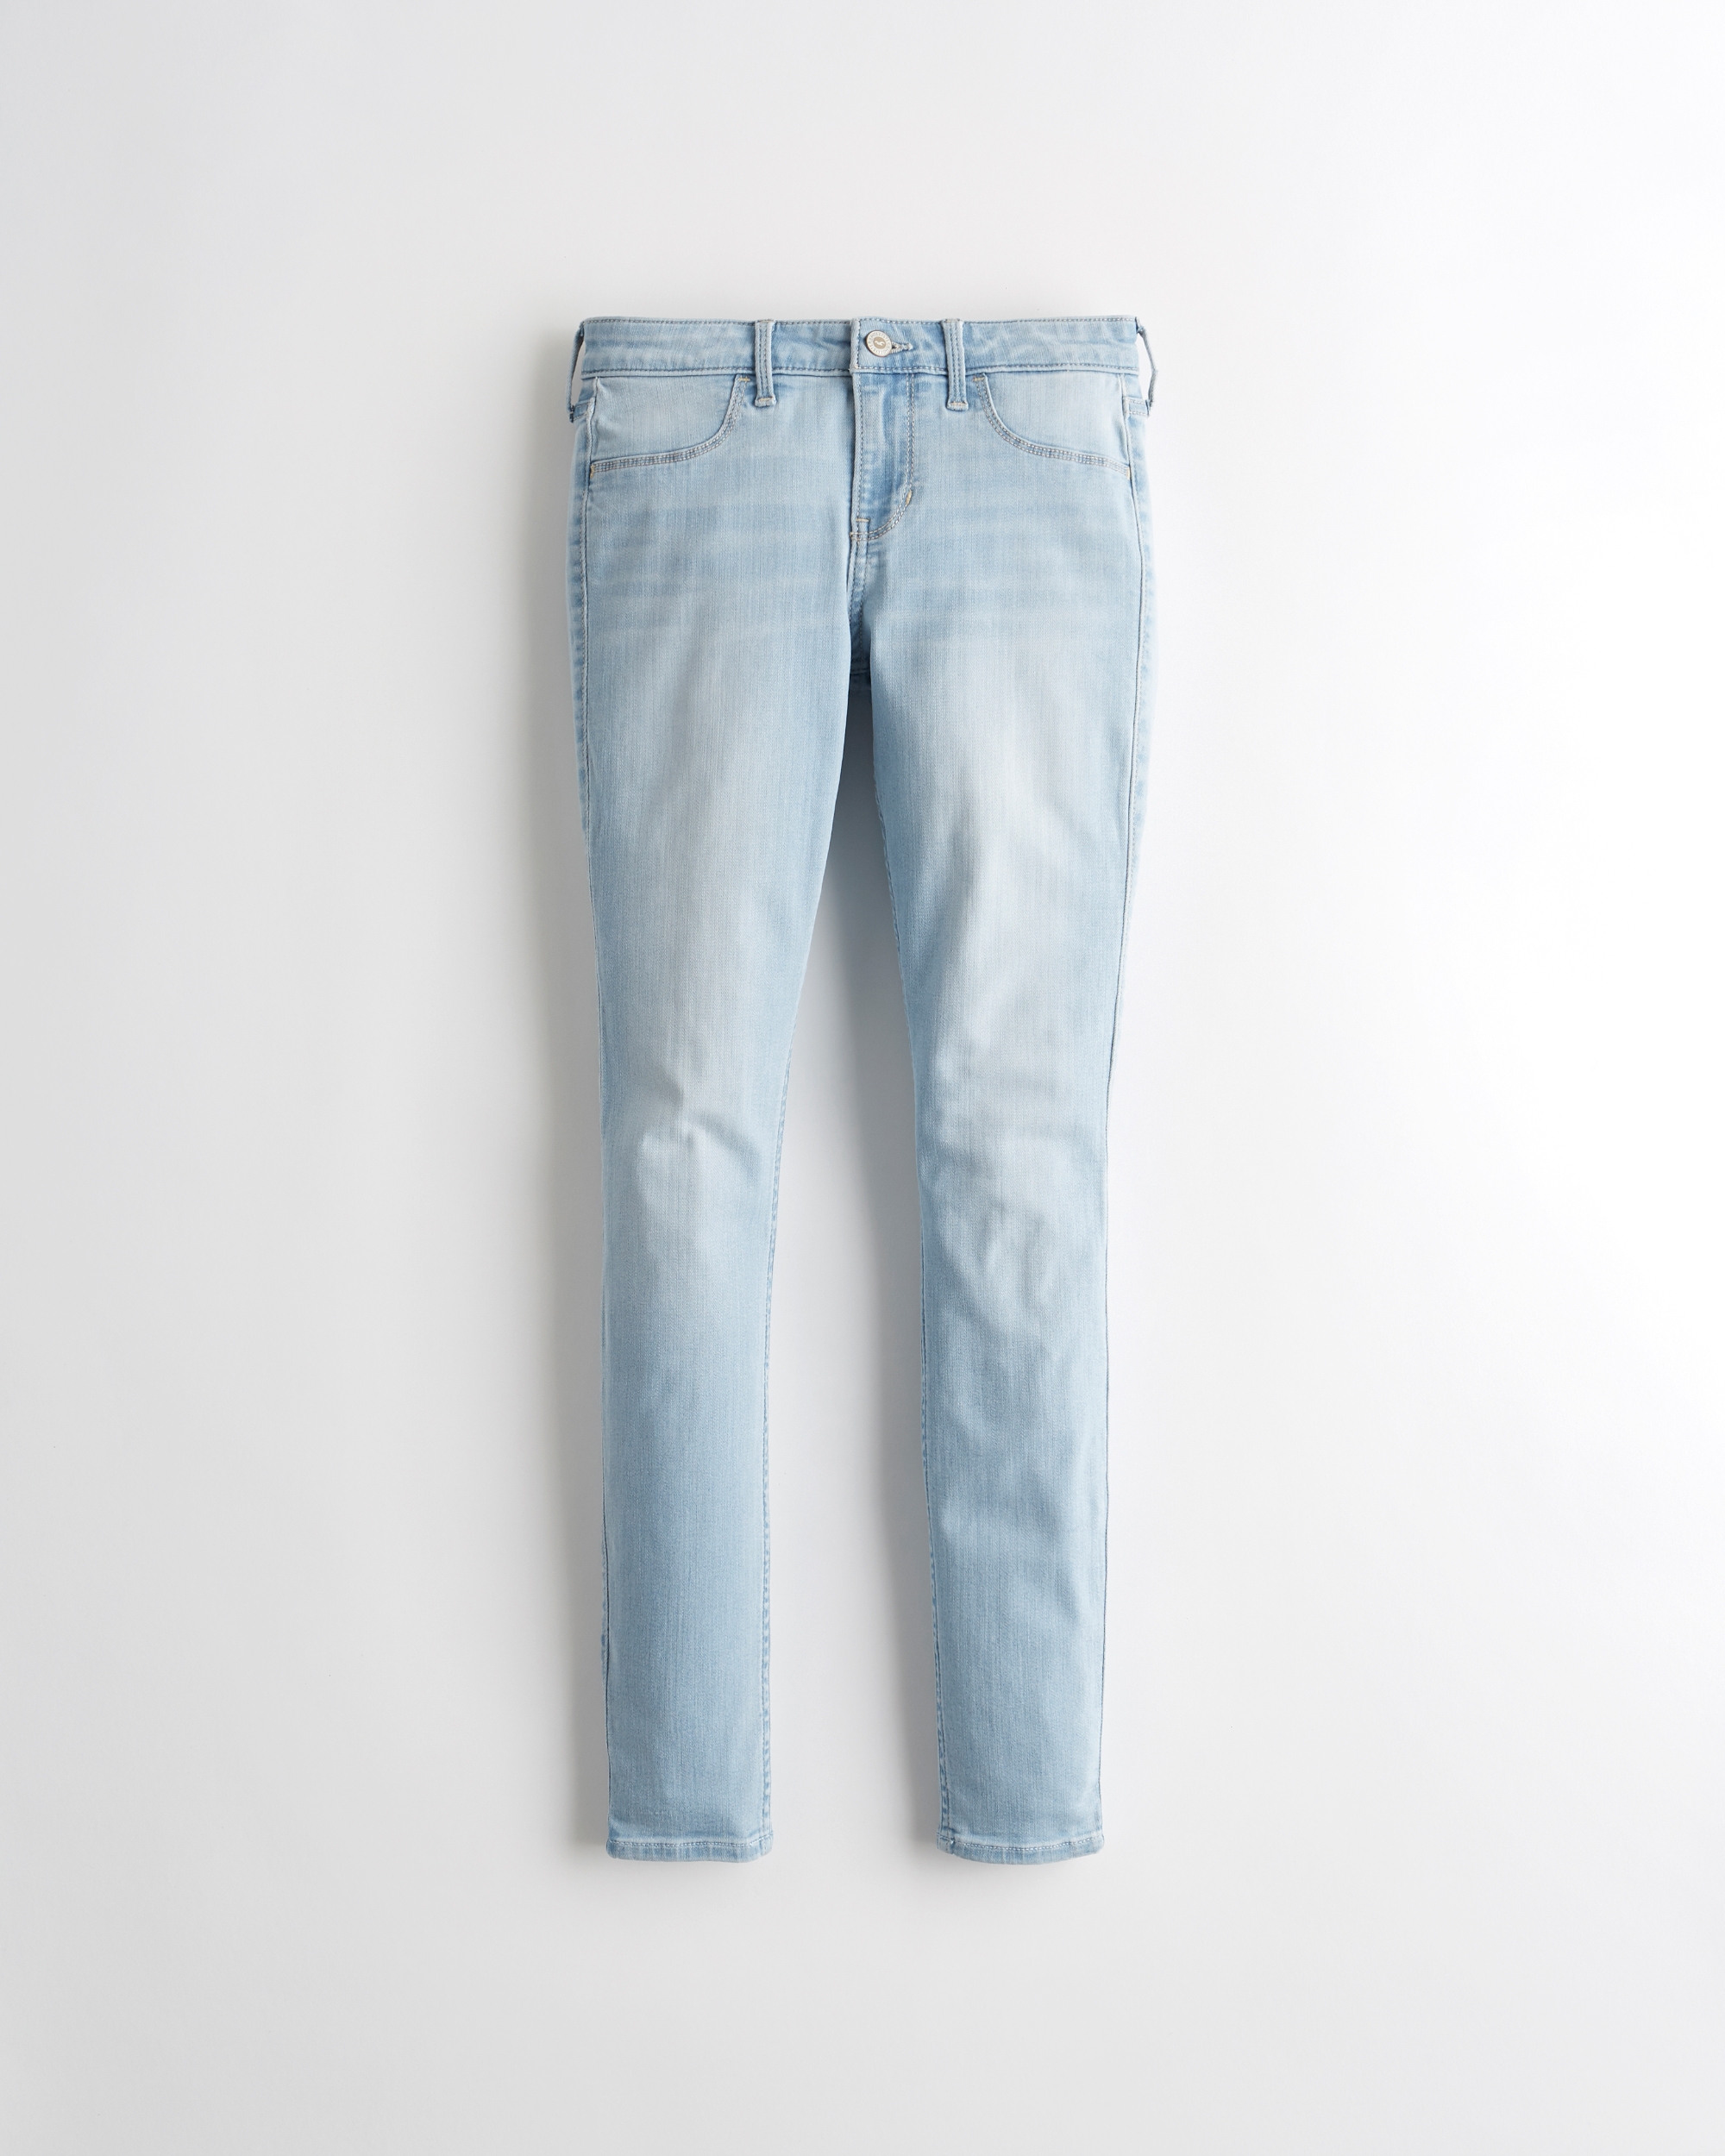 hollister jeans price in india